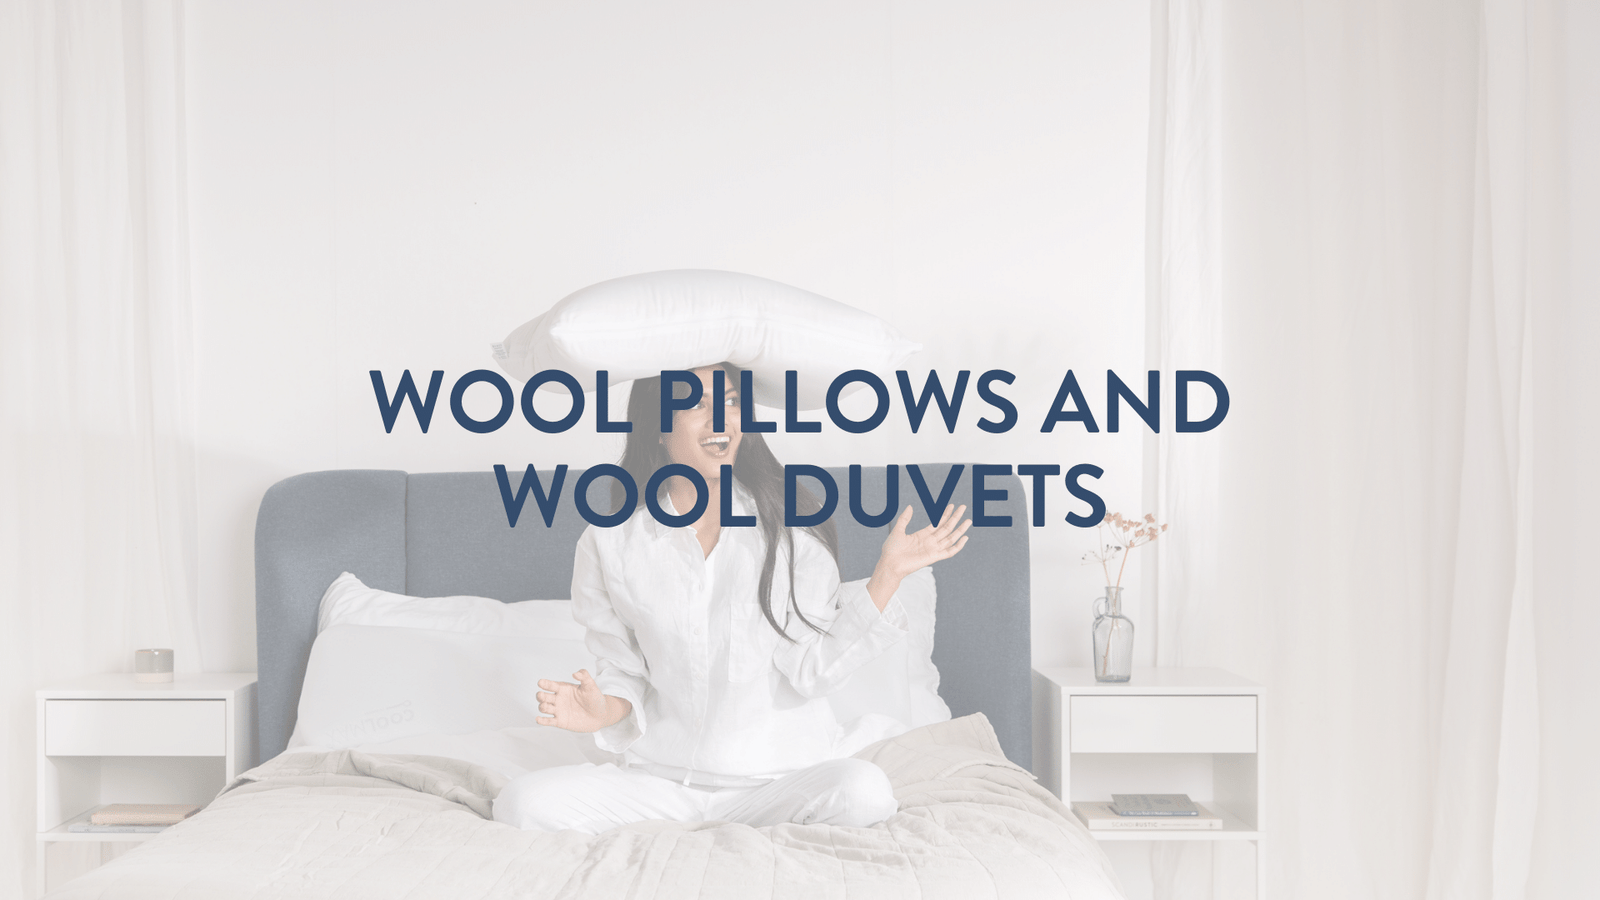 wool pillows duvets products UK made Devon Putnams